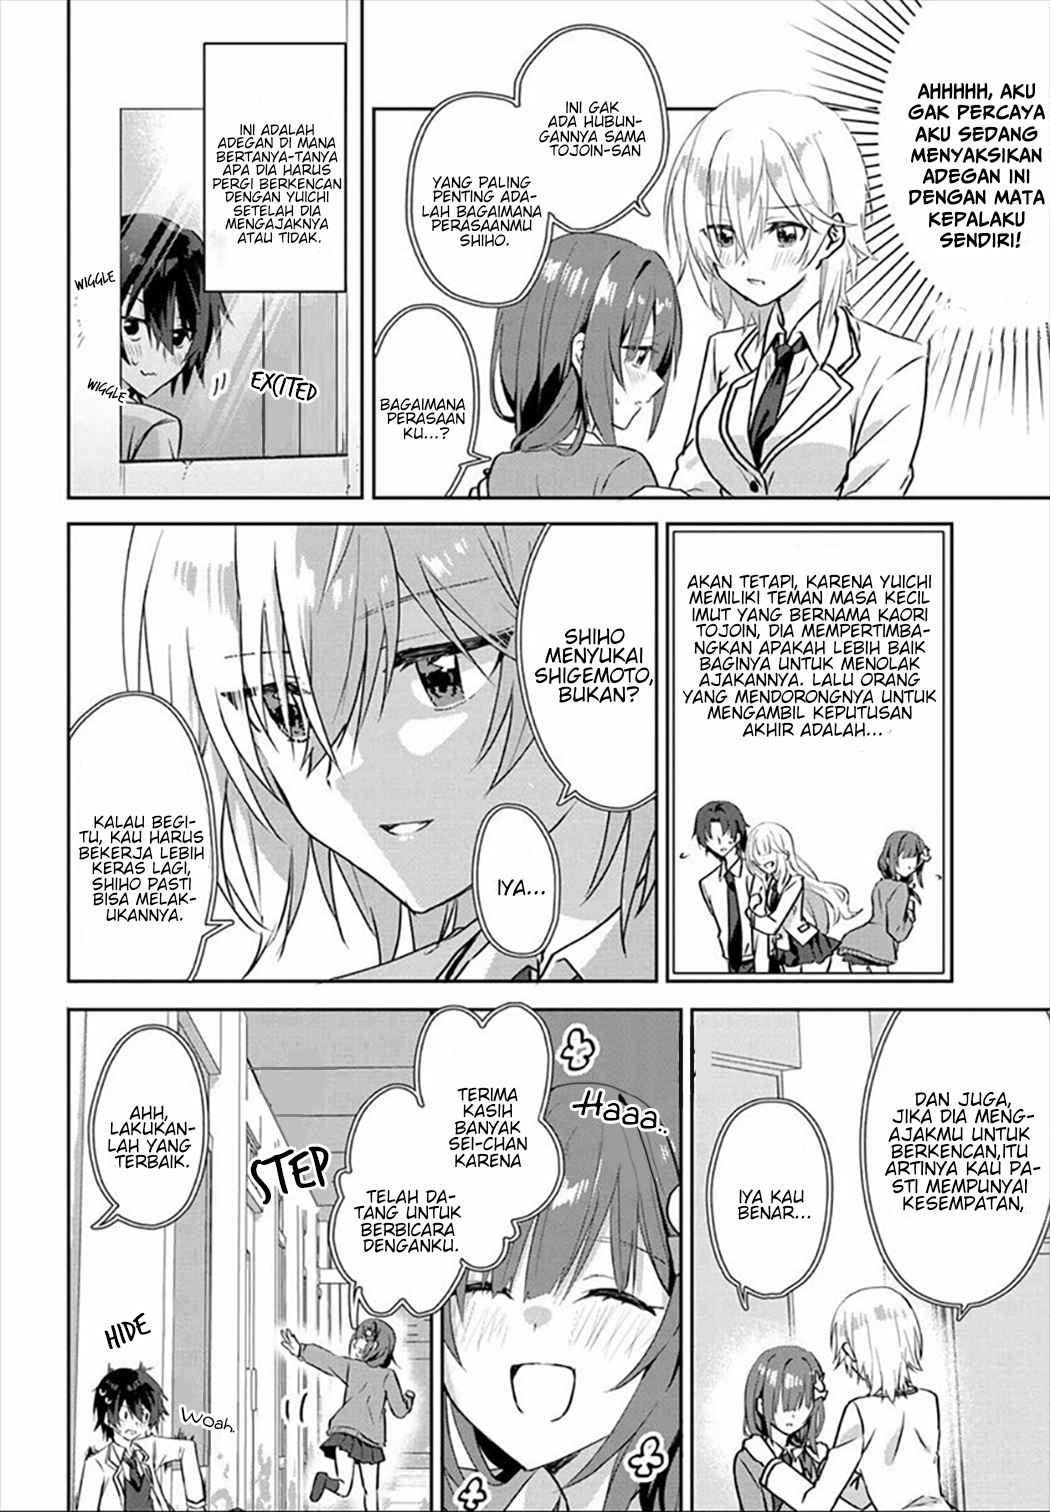 Since I'Ve Entered The World Of Romantic Comedy Manga, I'Ll Do My Best To Make The Losing Heroine Happy. Chapter 1 - 223